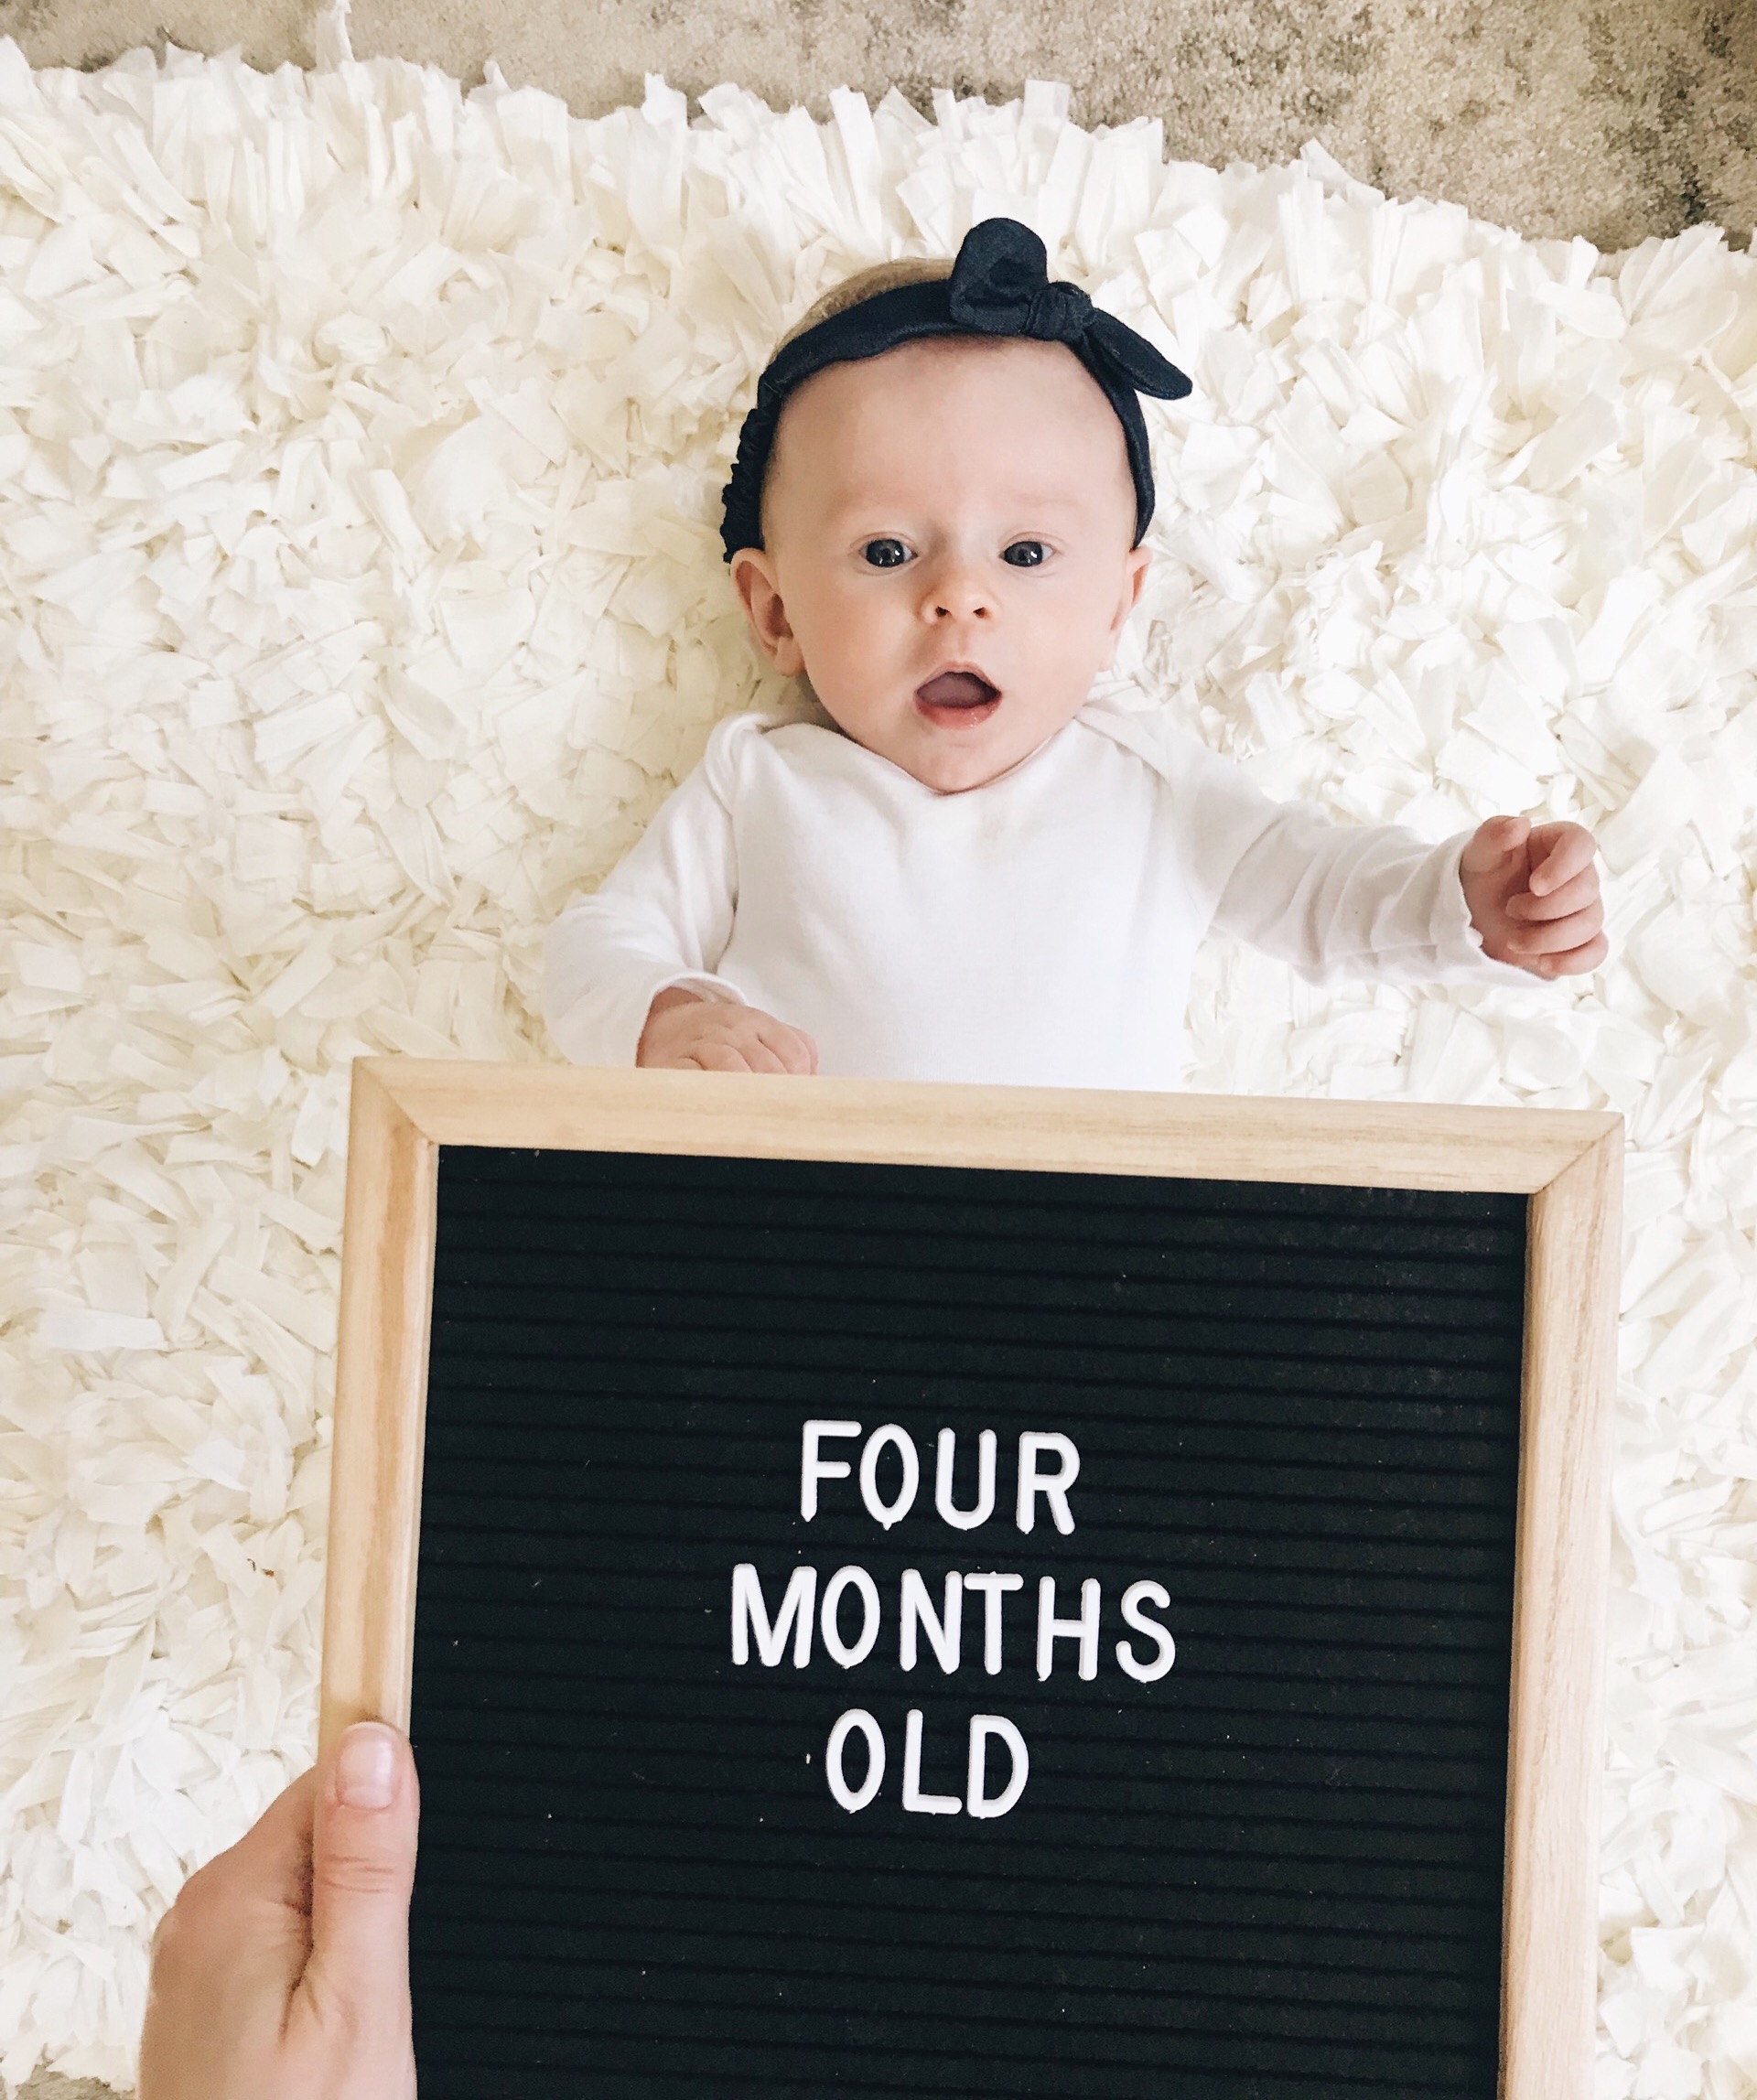 Baby Update: Sloane at Four Months Old